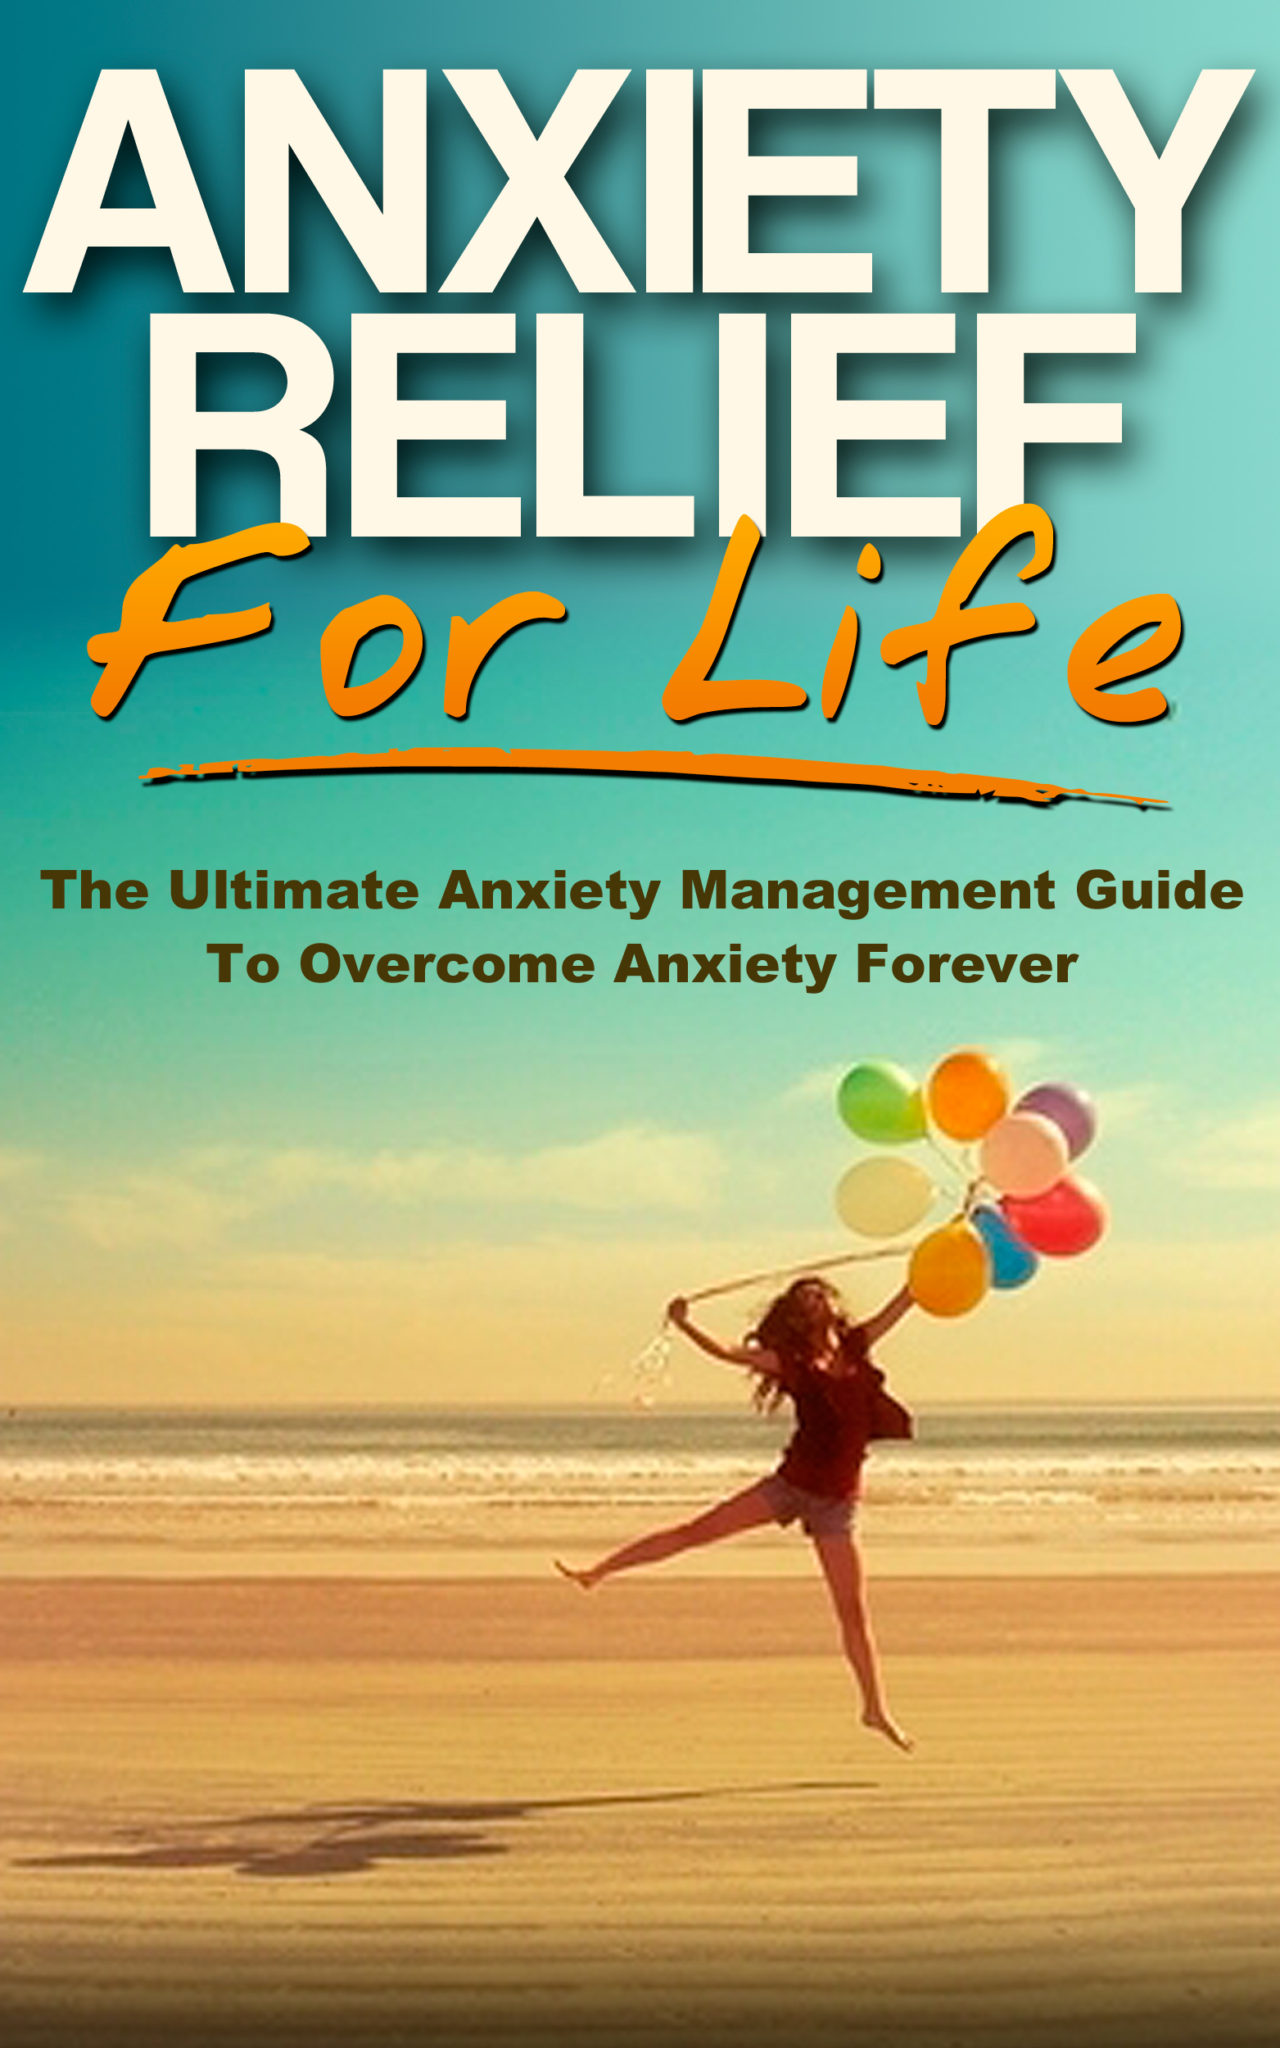 Anxiety Relief for Life: The Ultimate Anxiety Management Guide to Overcome Anxiety Forever (Anxiety and Depression, Anxiety Self Help, Anxiety Free) by Benjamin Caruso